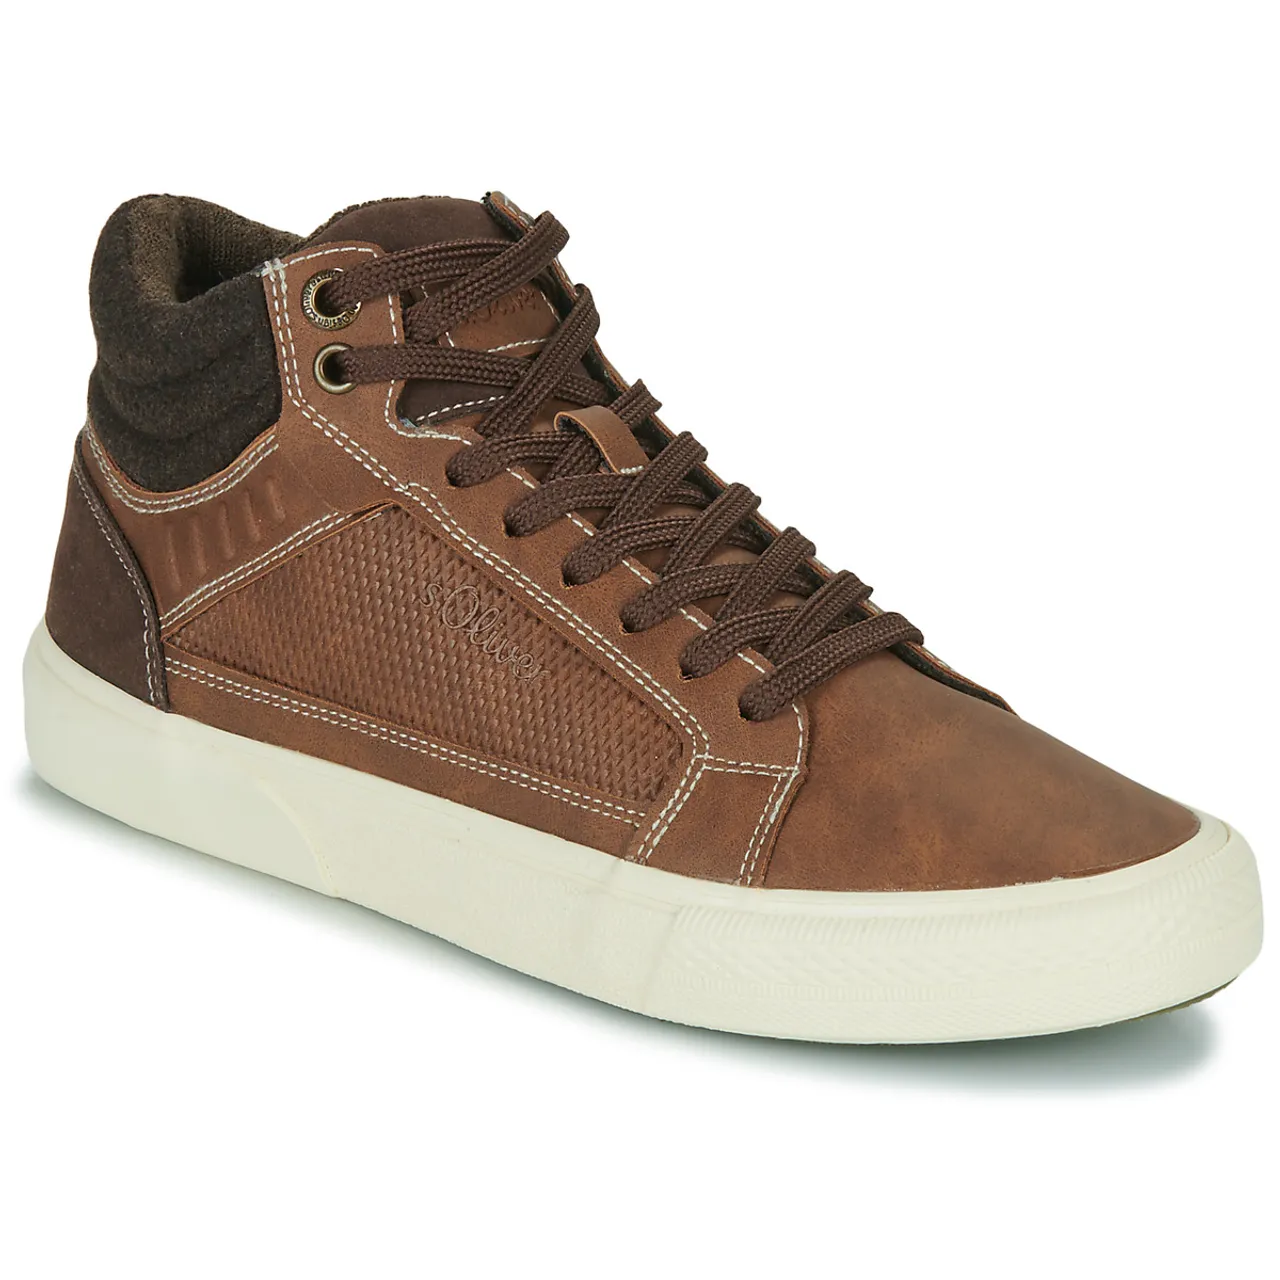 S.Oliver  15200-39-300  men's Shoes (High-top Trainers) in Brown